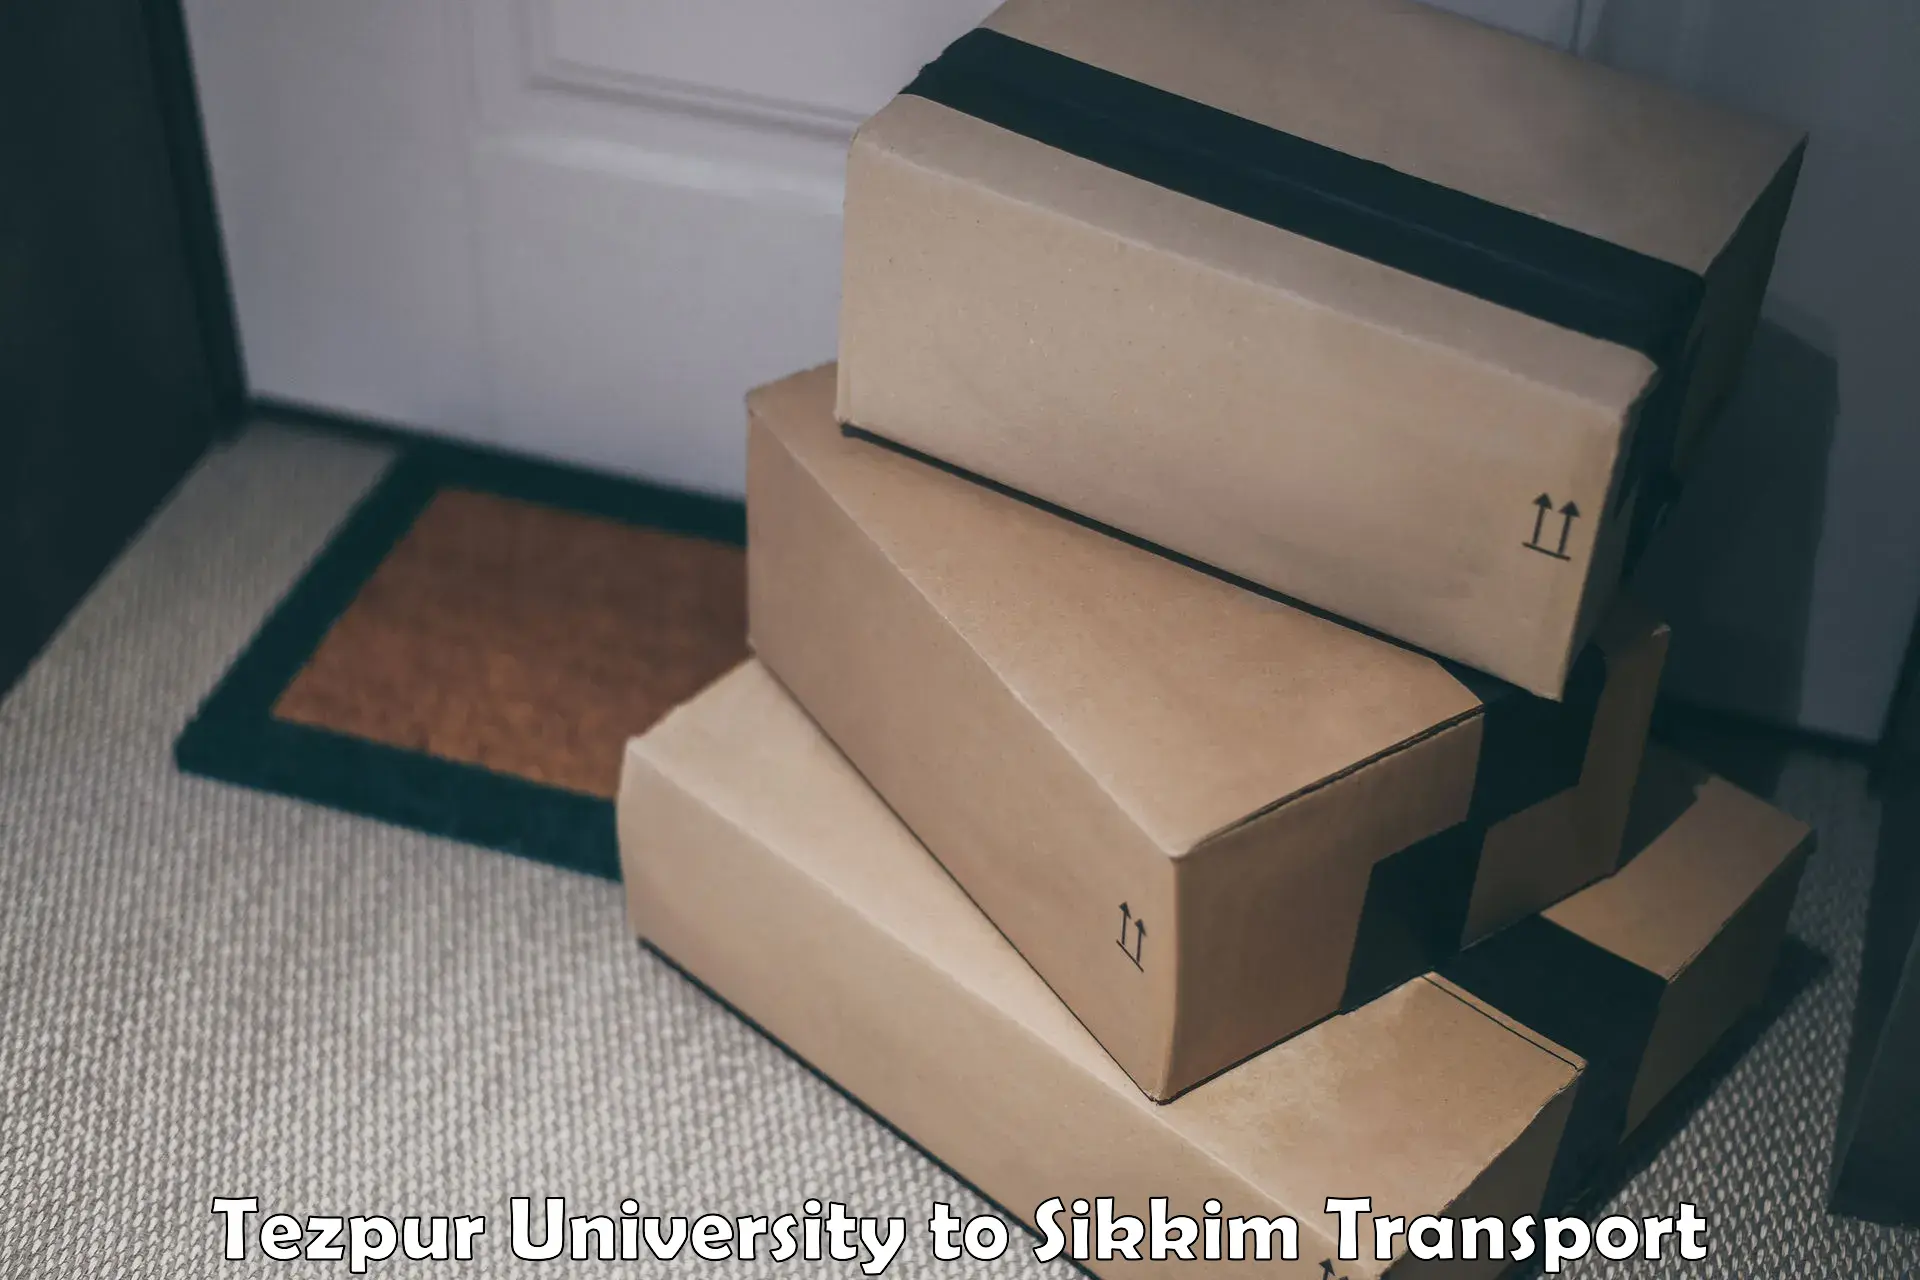 Road transport online services in Tezpur University to Pelling